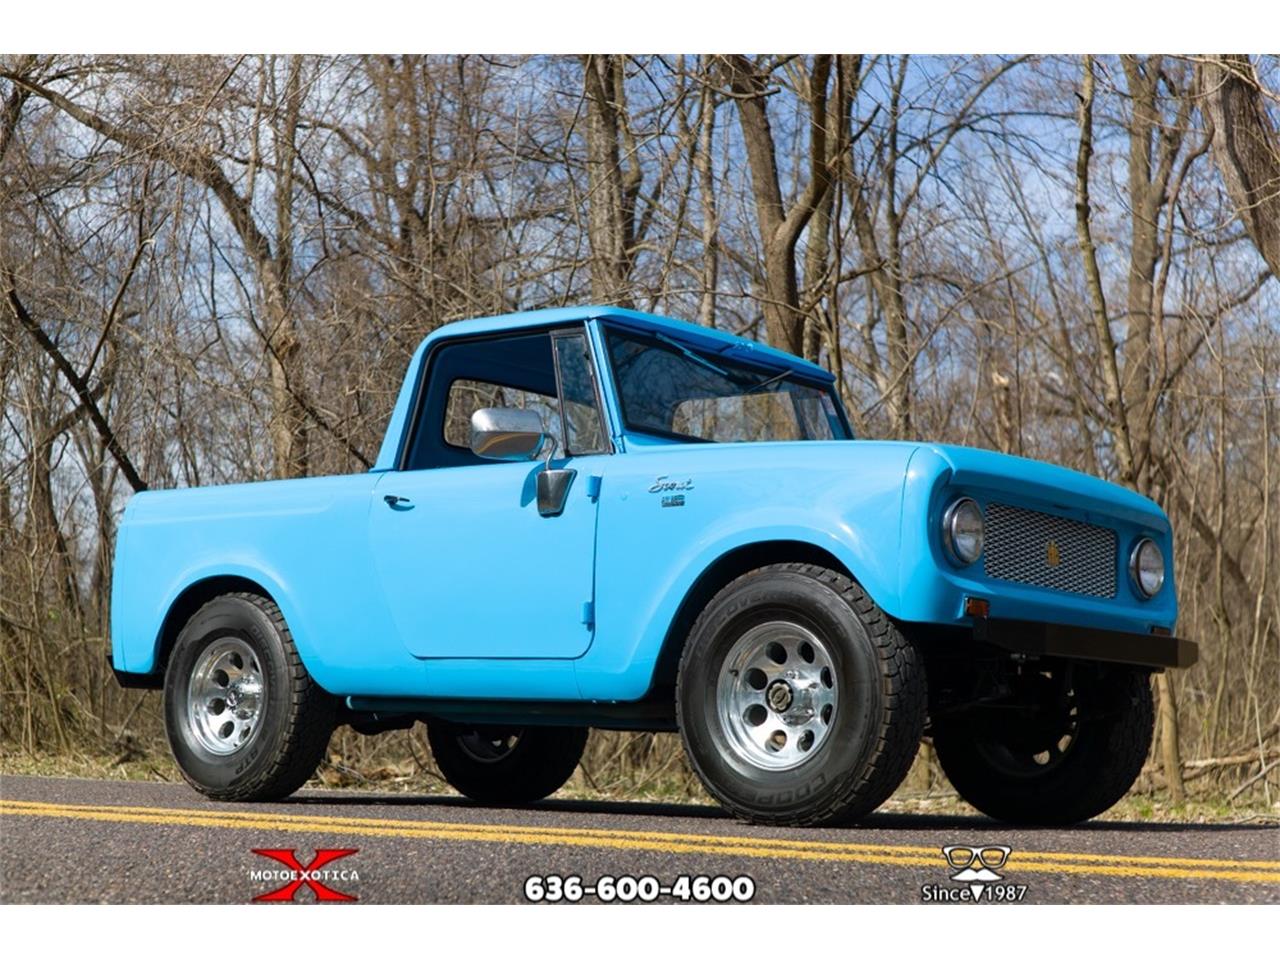 1965 International Harvester Scout 80 4x4 For Sale